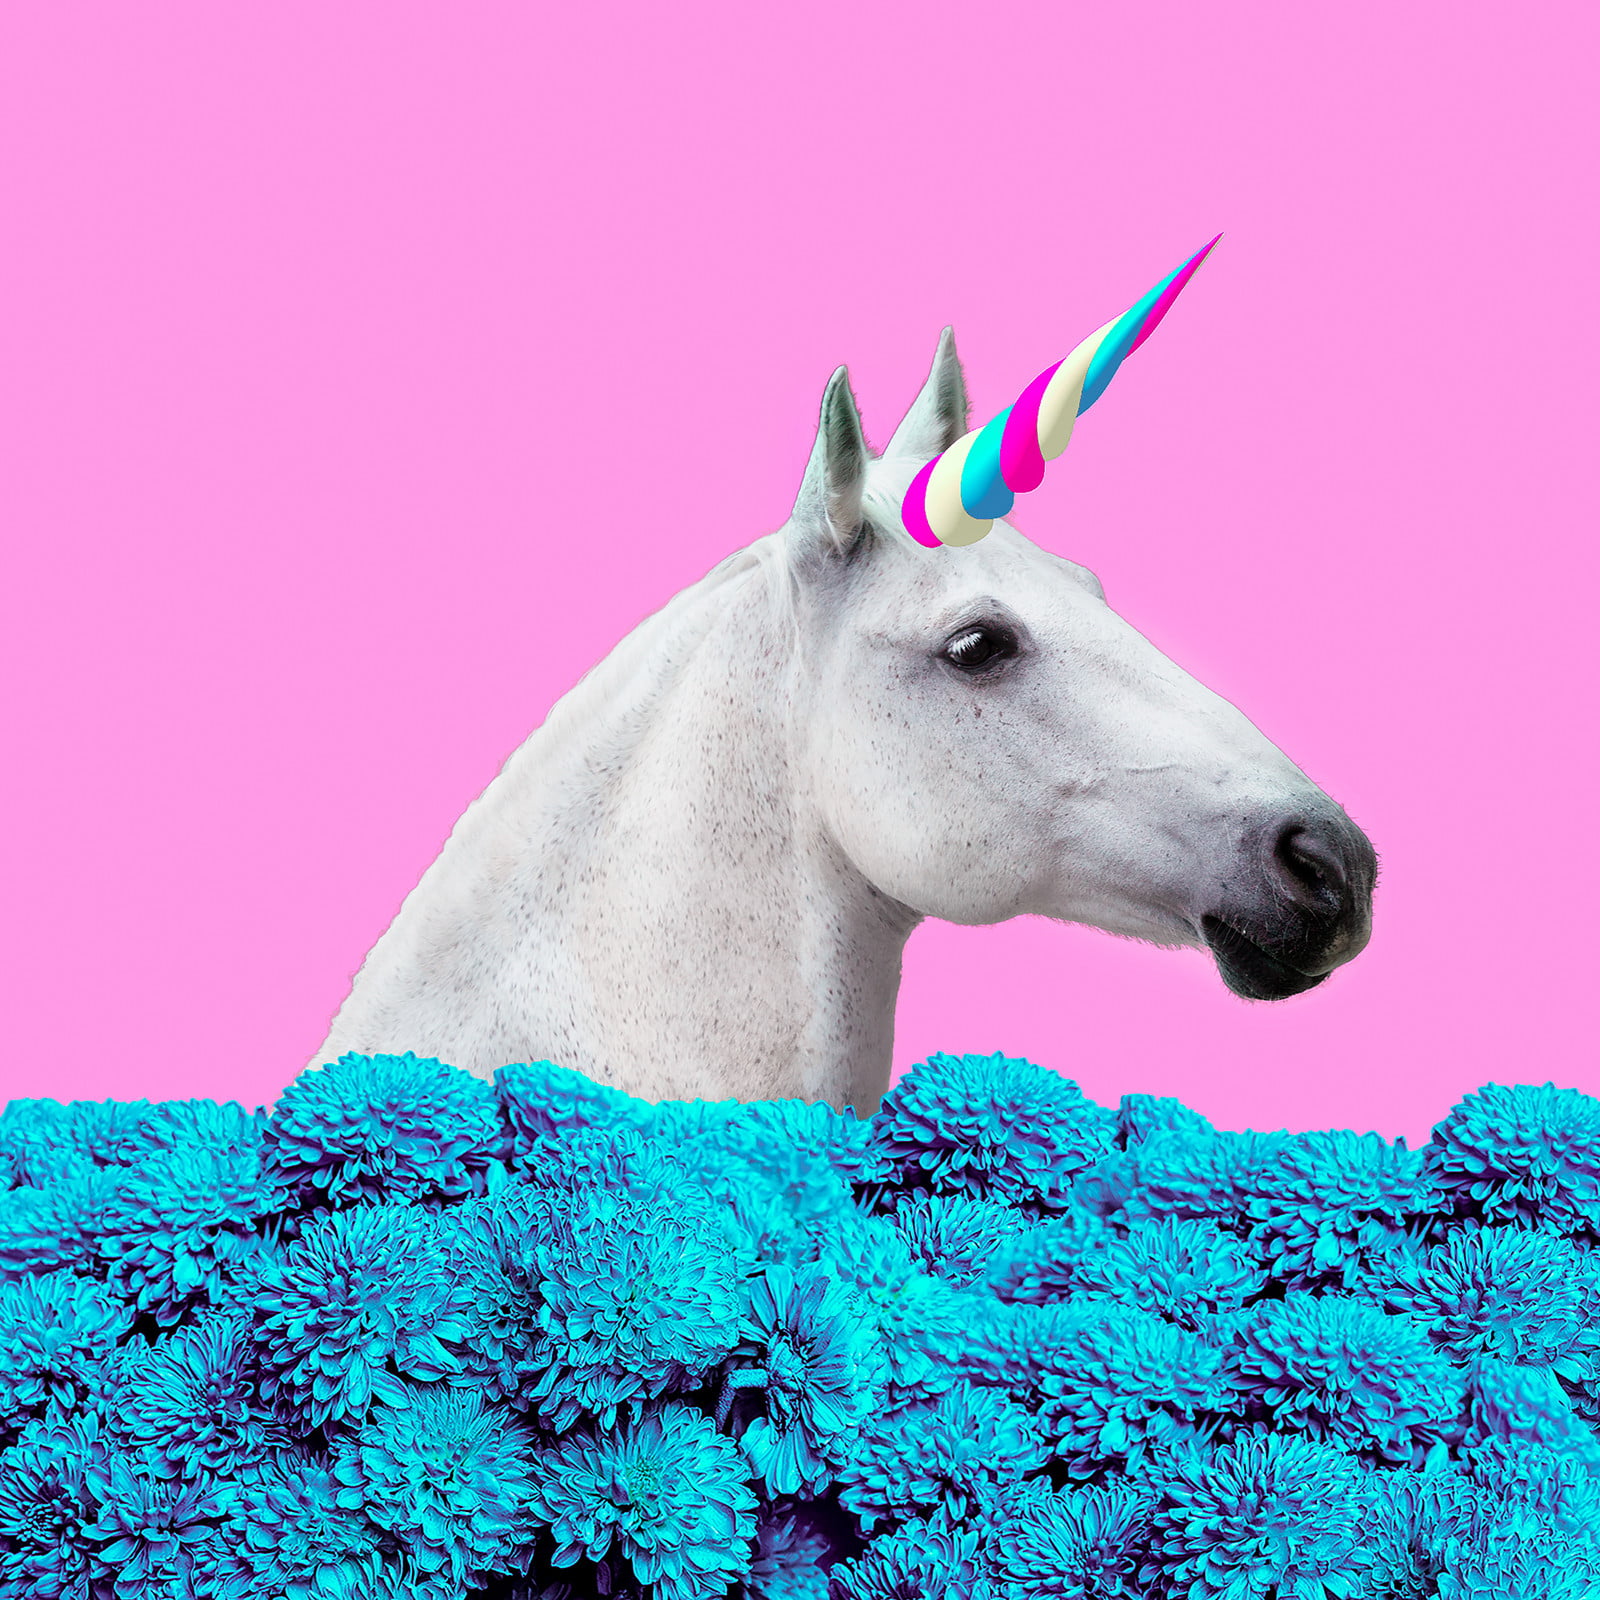 From Unicorns To Space Shutterstock Pinpoints Creative